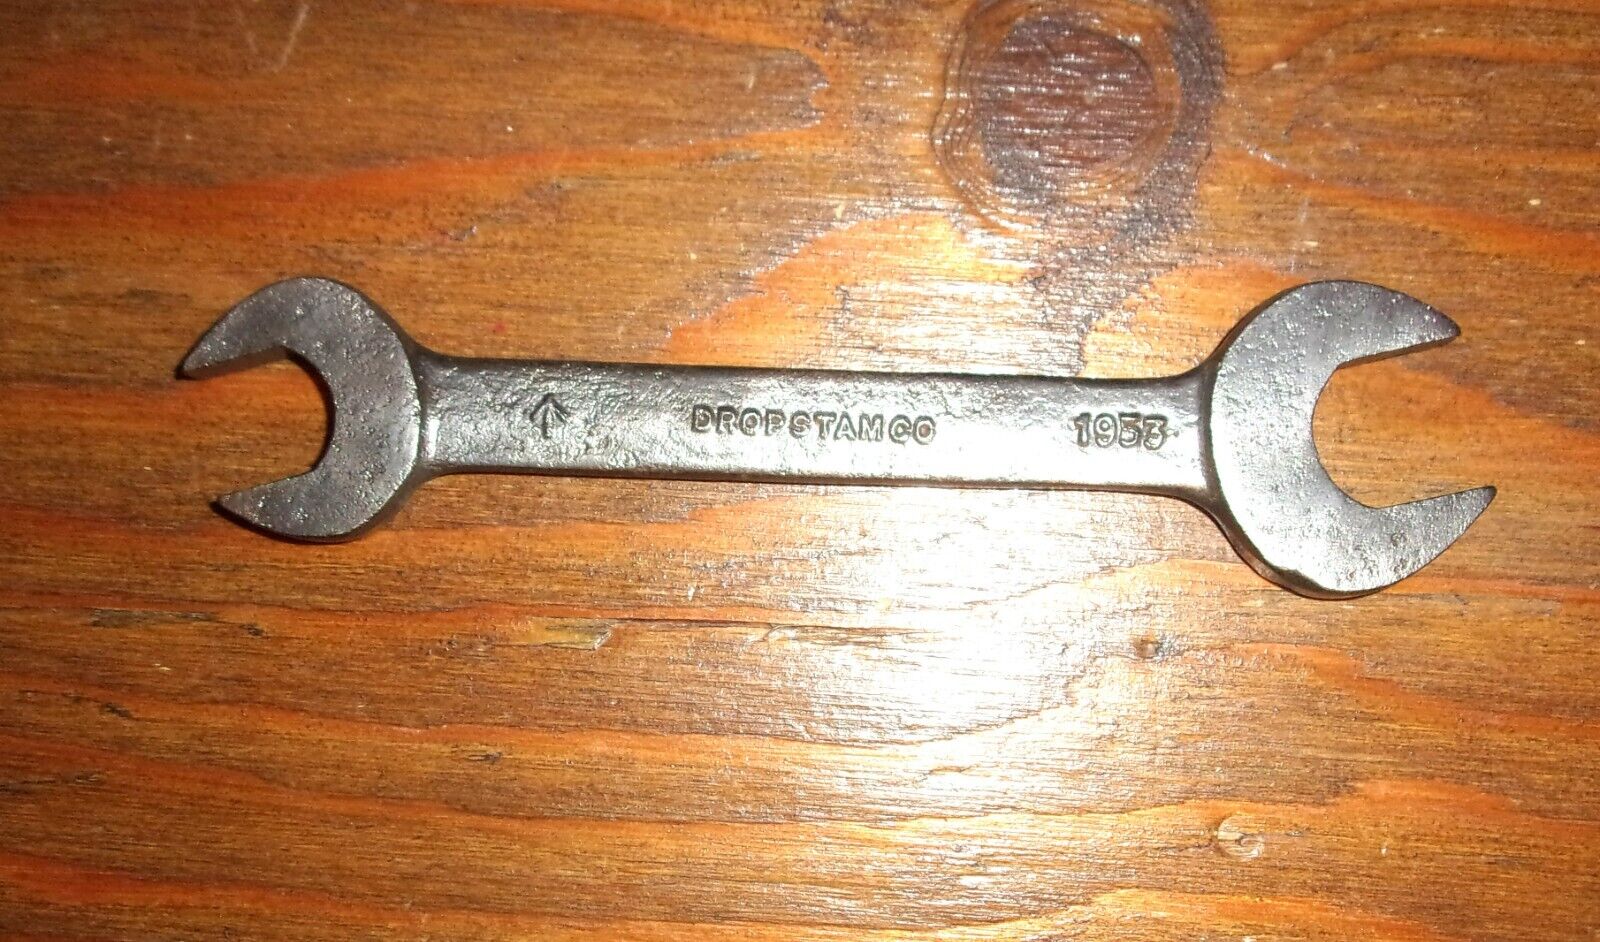 Vintage Military Issue DROPSTAMCO No.  H/4228 - 1953 Open ended Spanner Free P+P